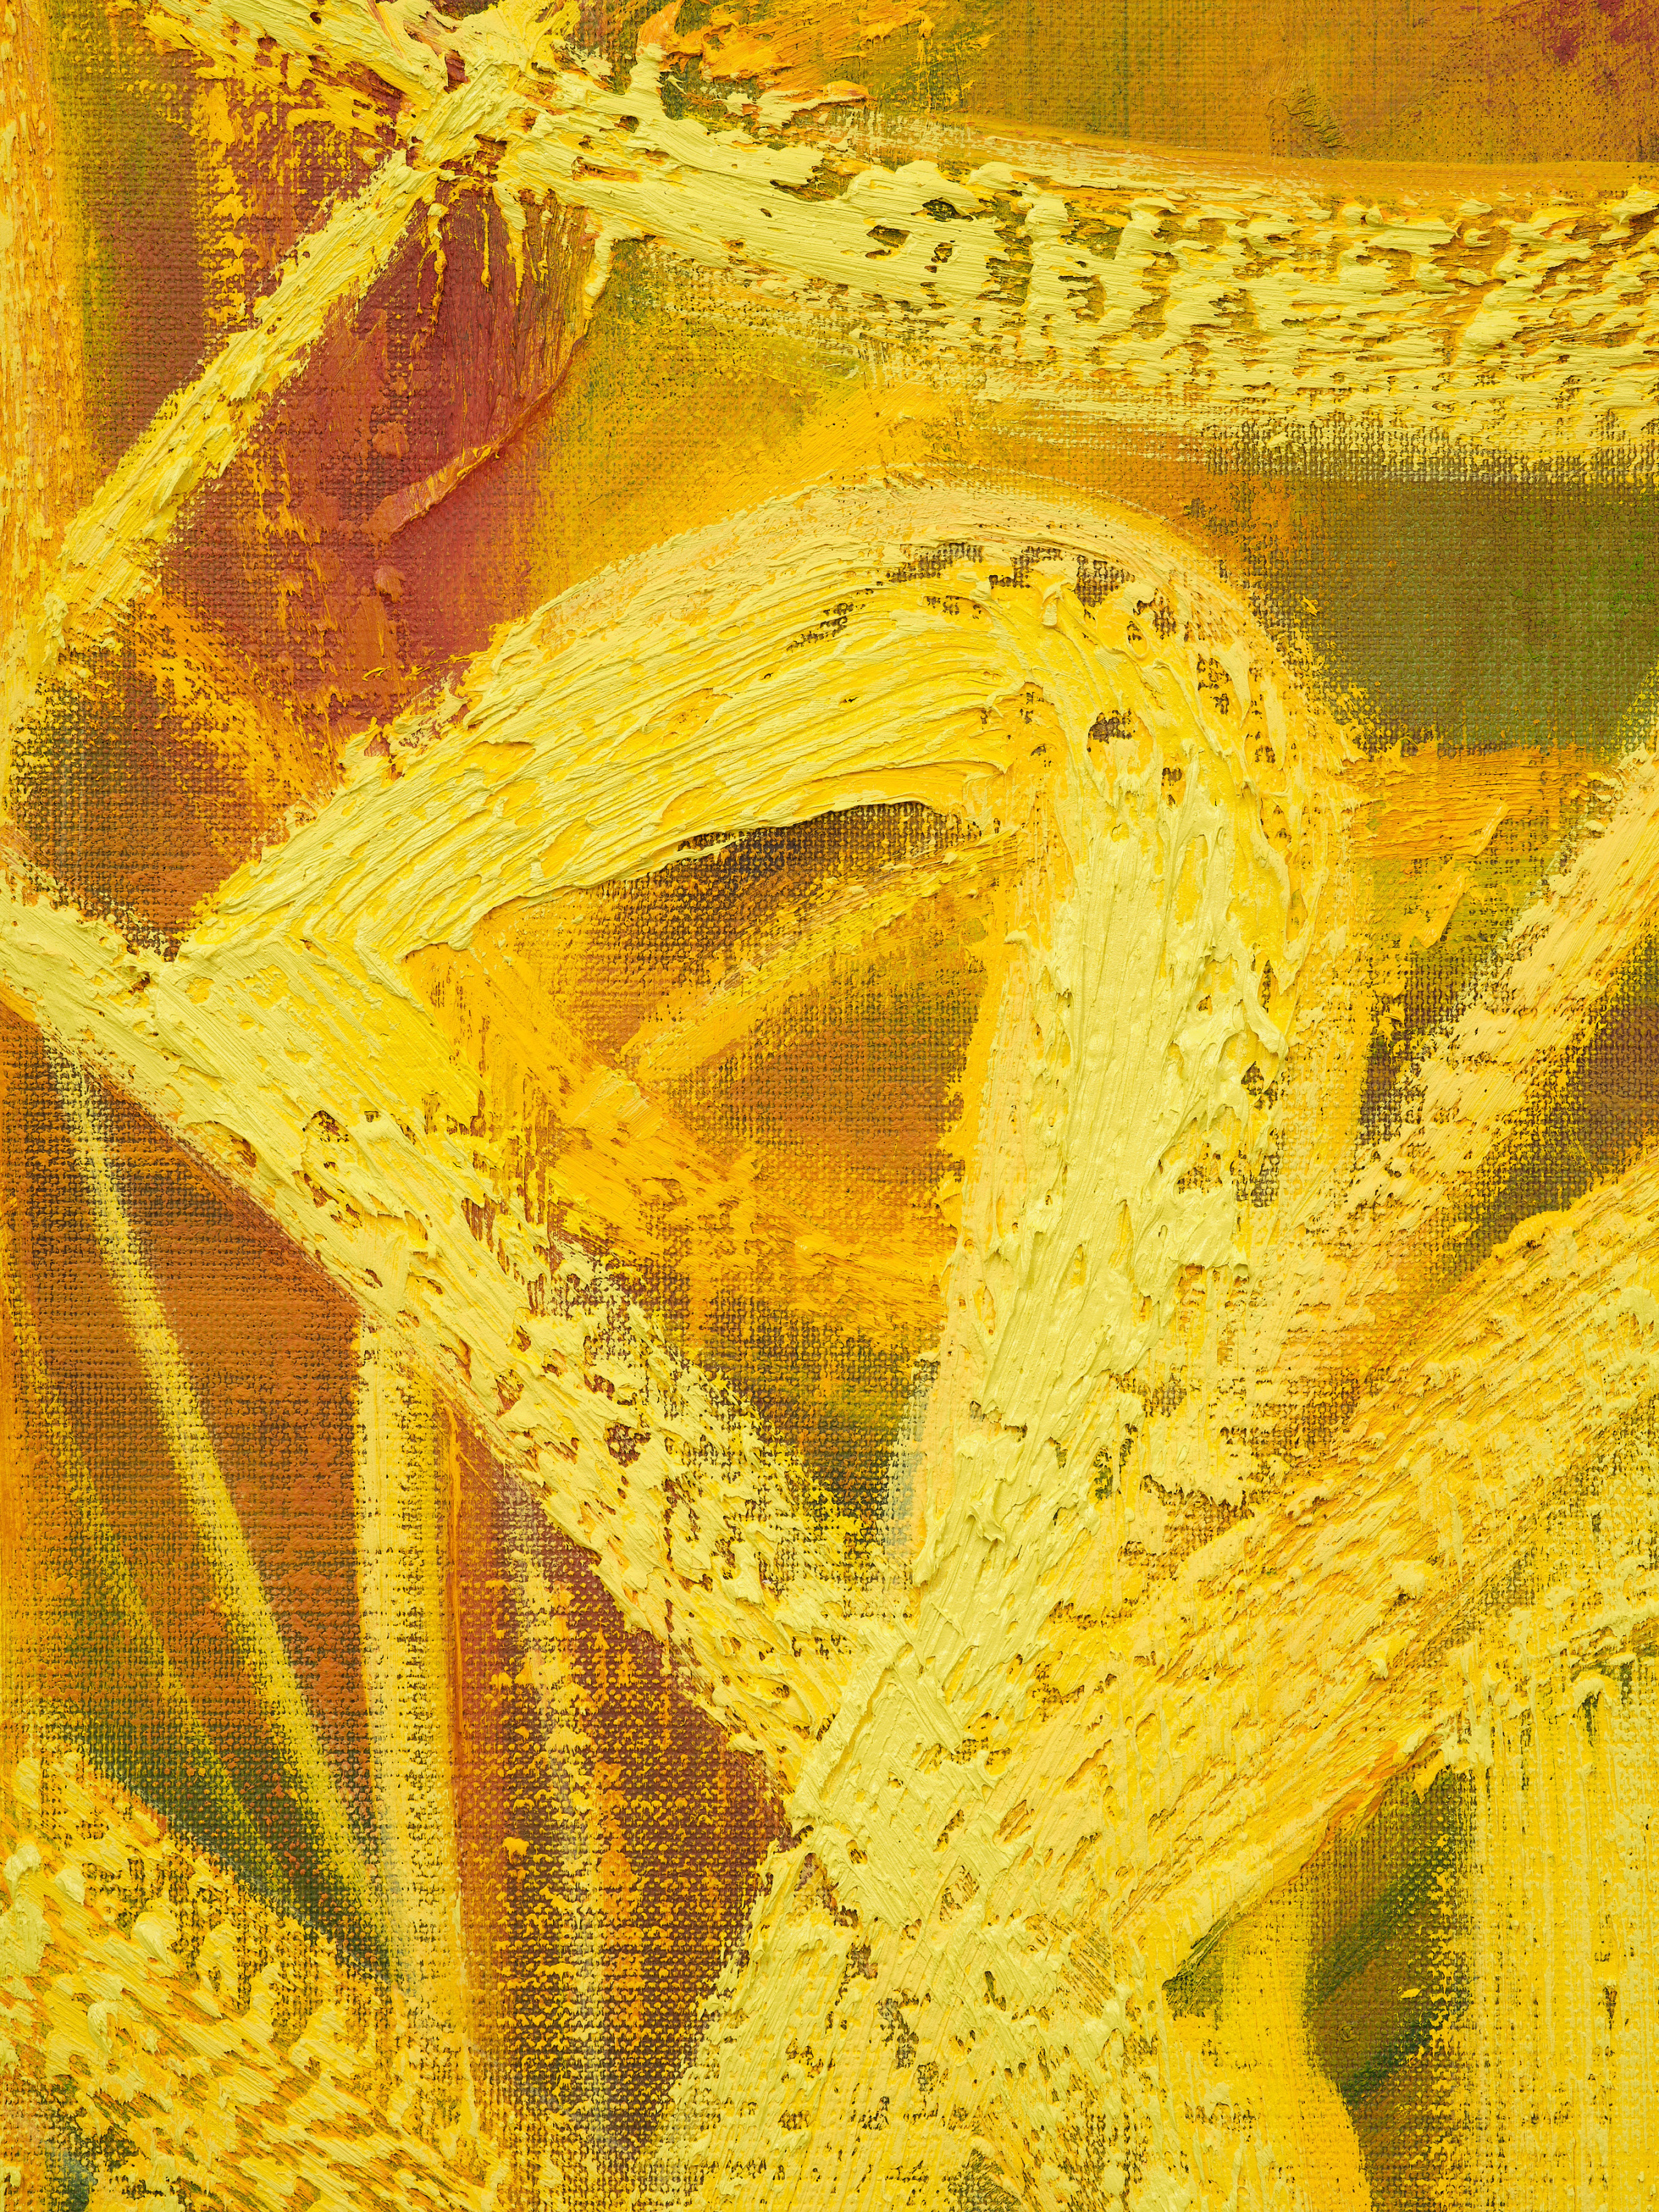 Detail of Nigel Cooke's "Canis". An abstract painting made with vibrant yellow lines on top of subdued reds and oranges.